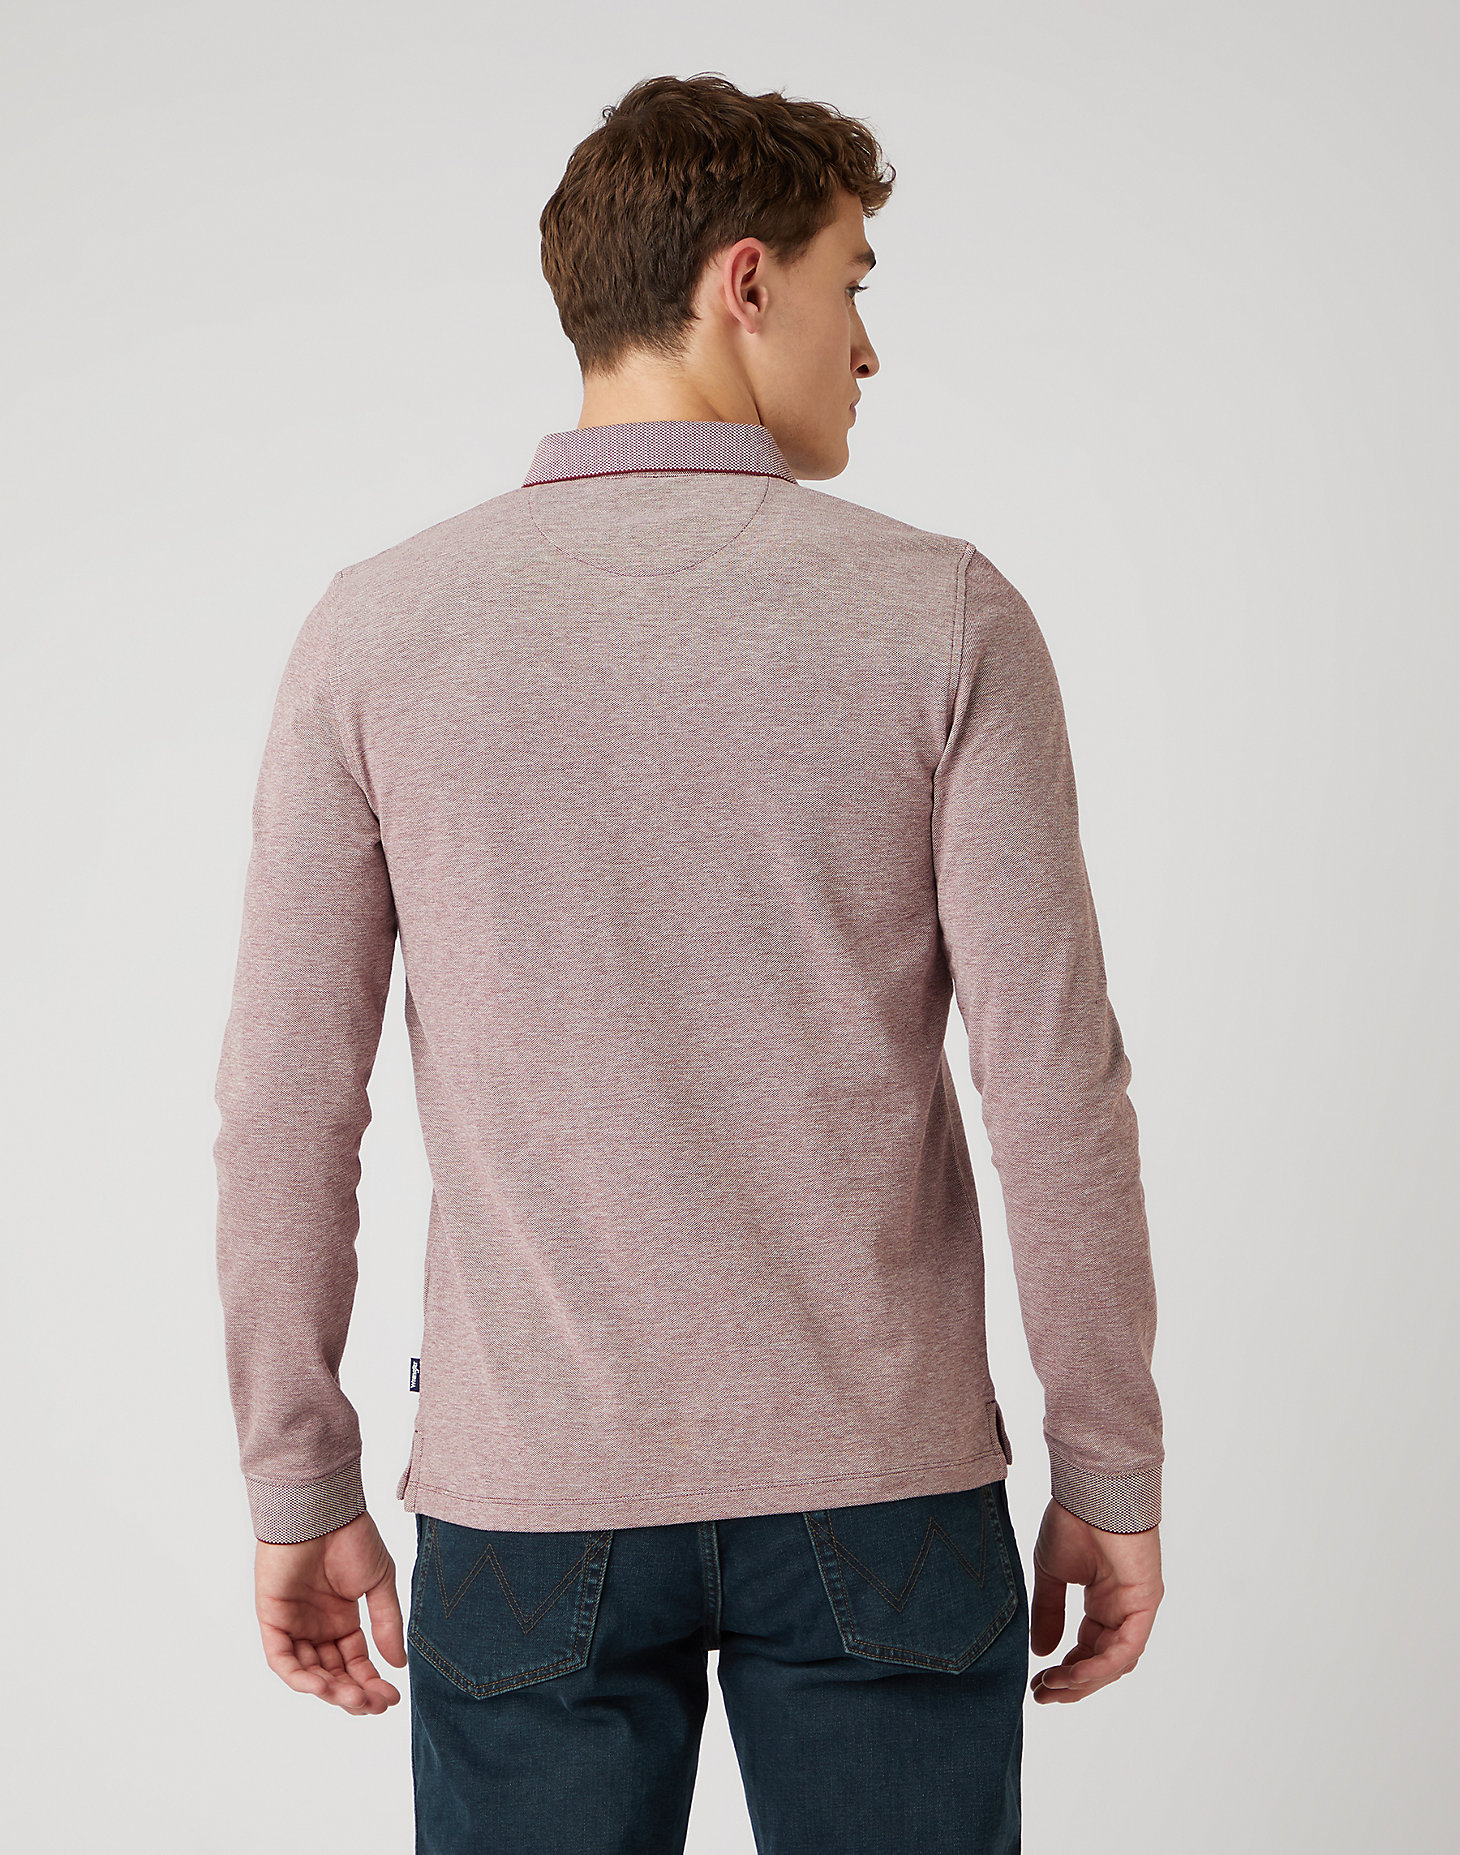 Long Sleeve Refined Polo in Tawny Port alternative view 2